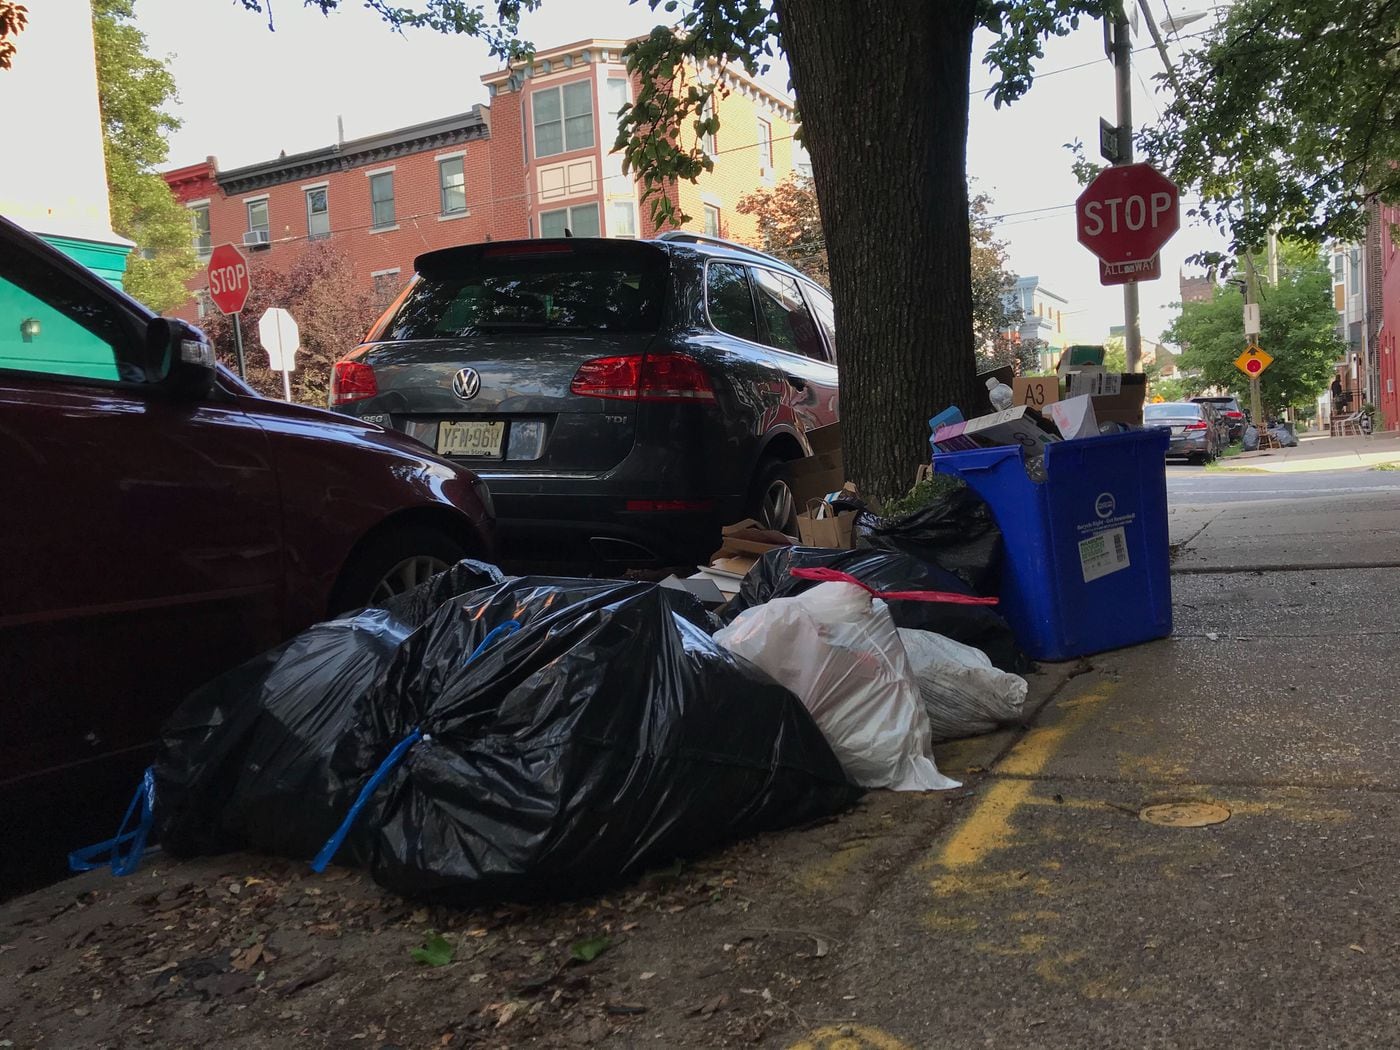 Philadelphia trash pickup: Lateness and delays due to COVID | Opinion